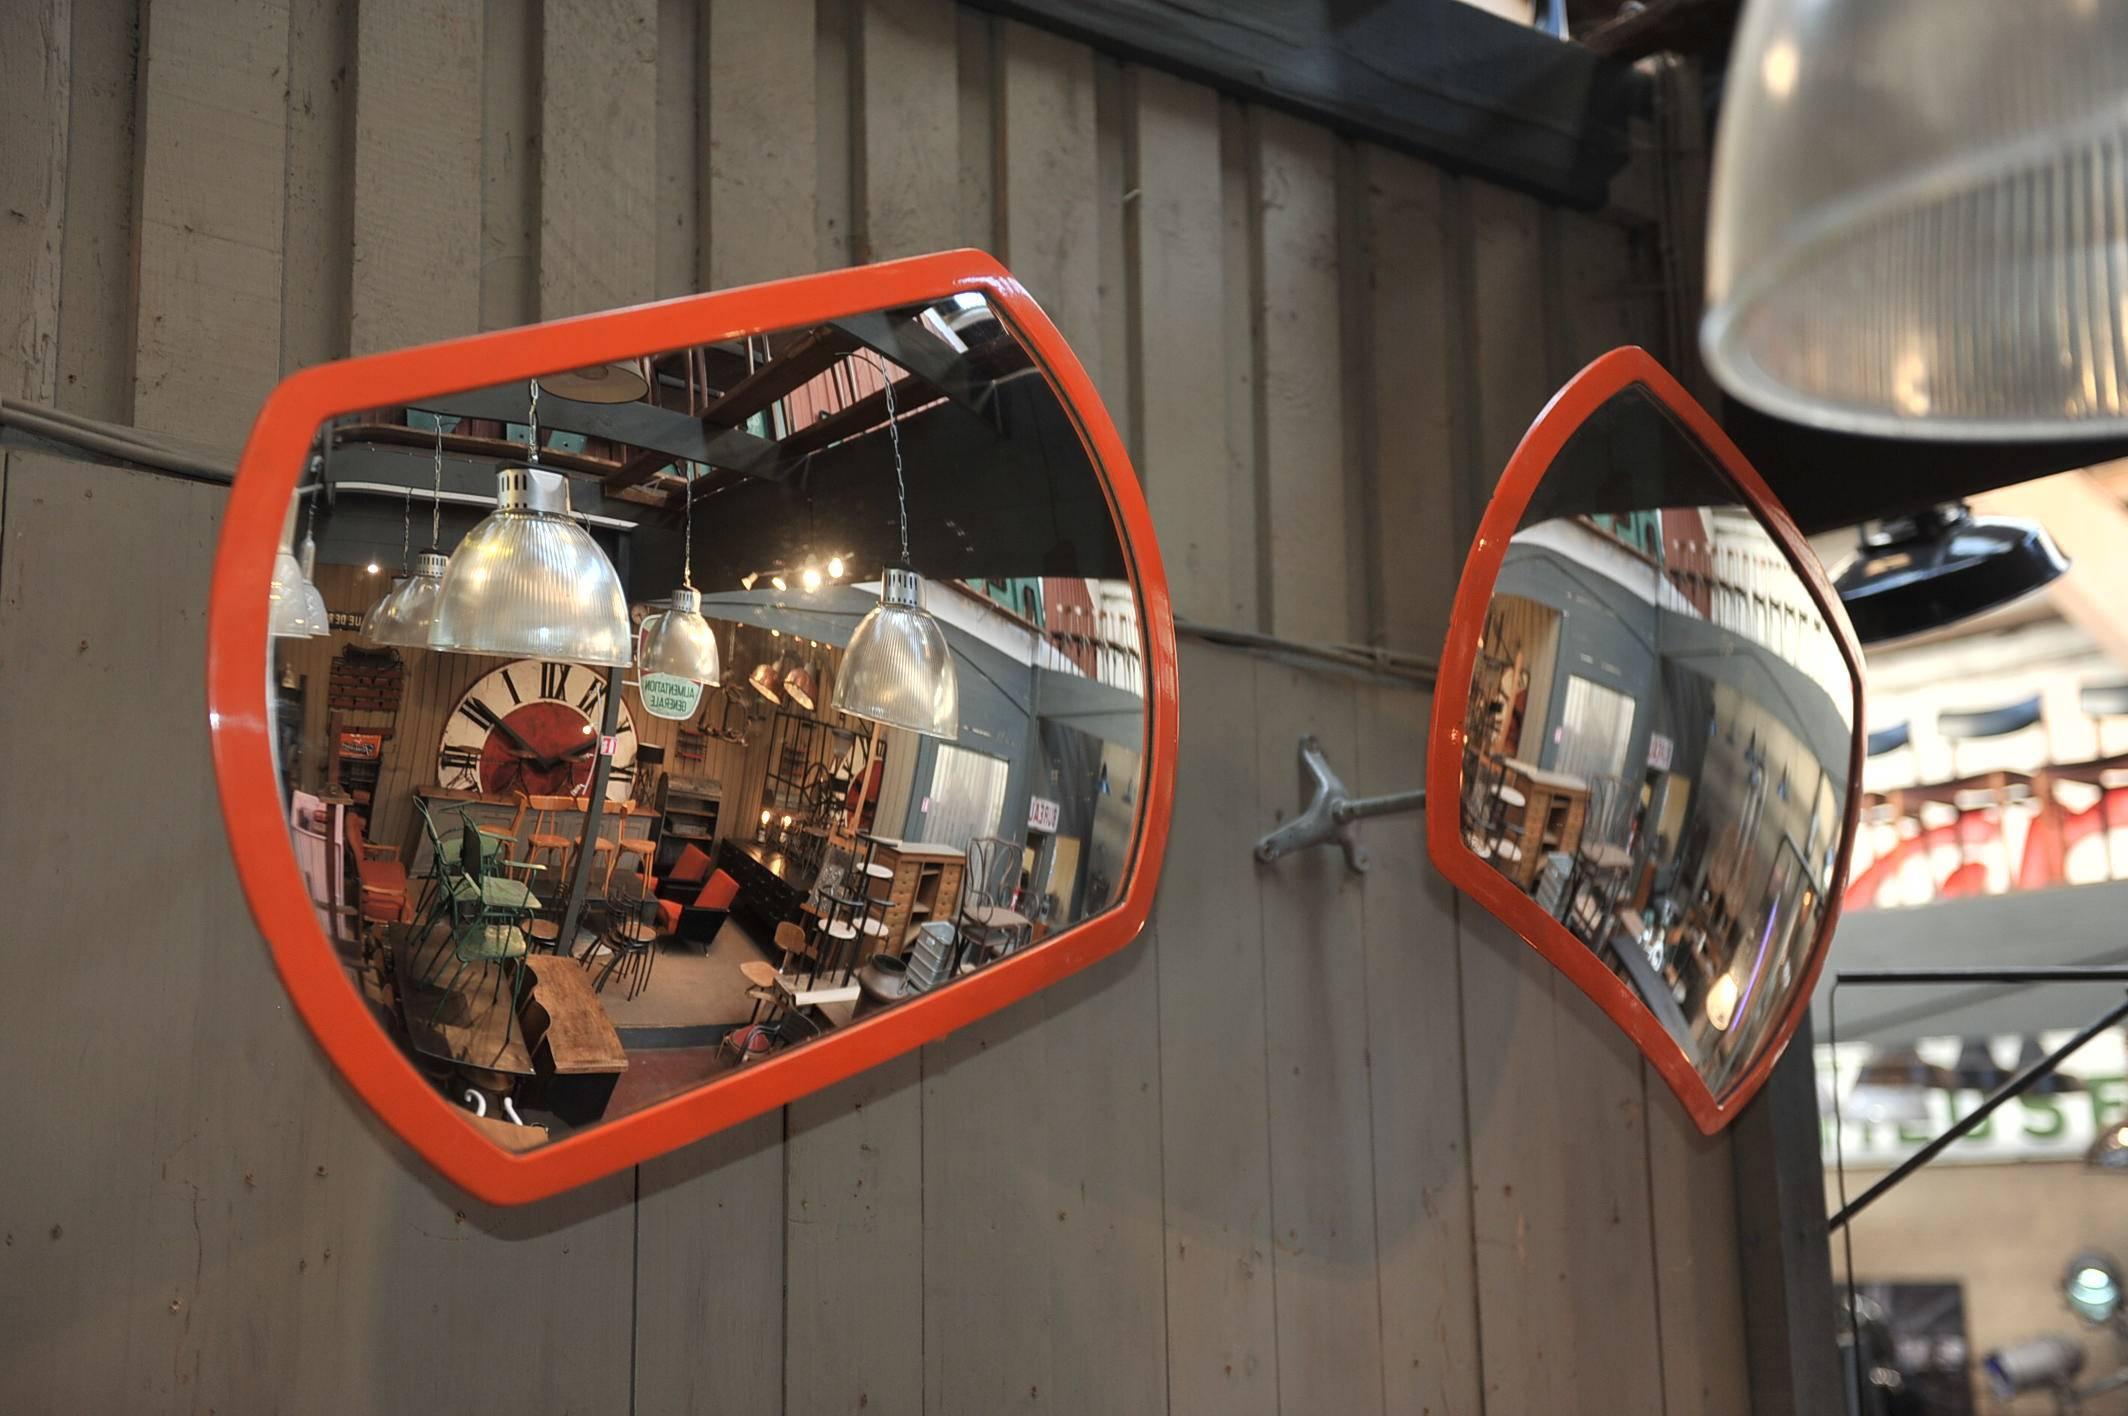 Paire of 1960 s orange Fibreglass Convex Mirrors with metal adjustable and removable  wall arm.
 Depht without Arm: 6 cm